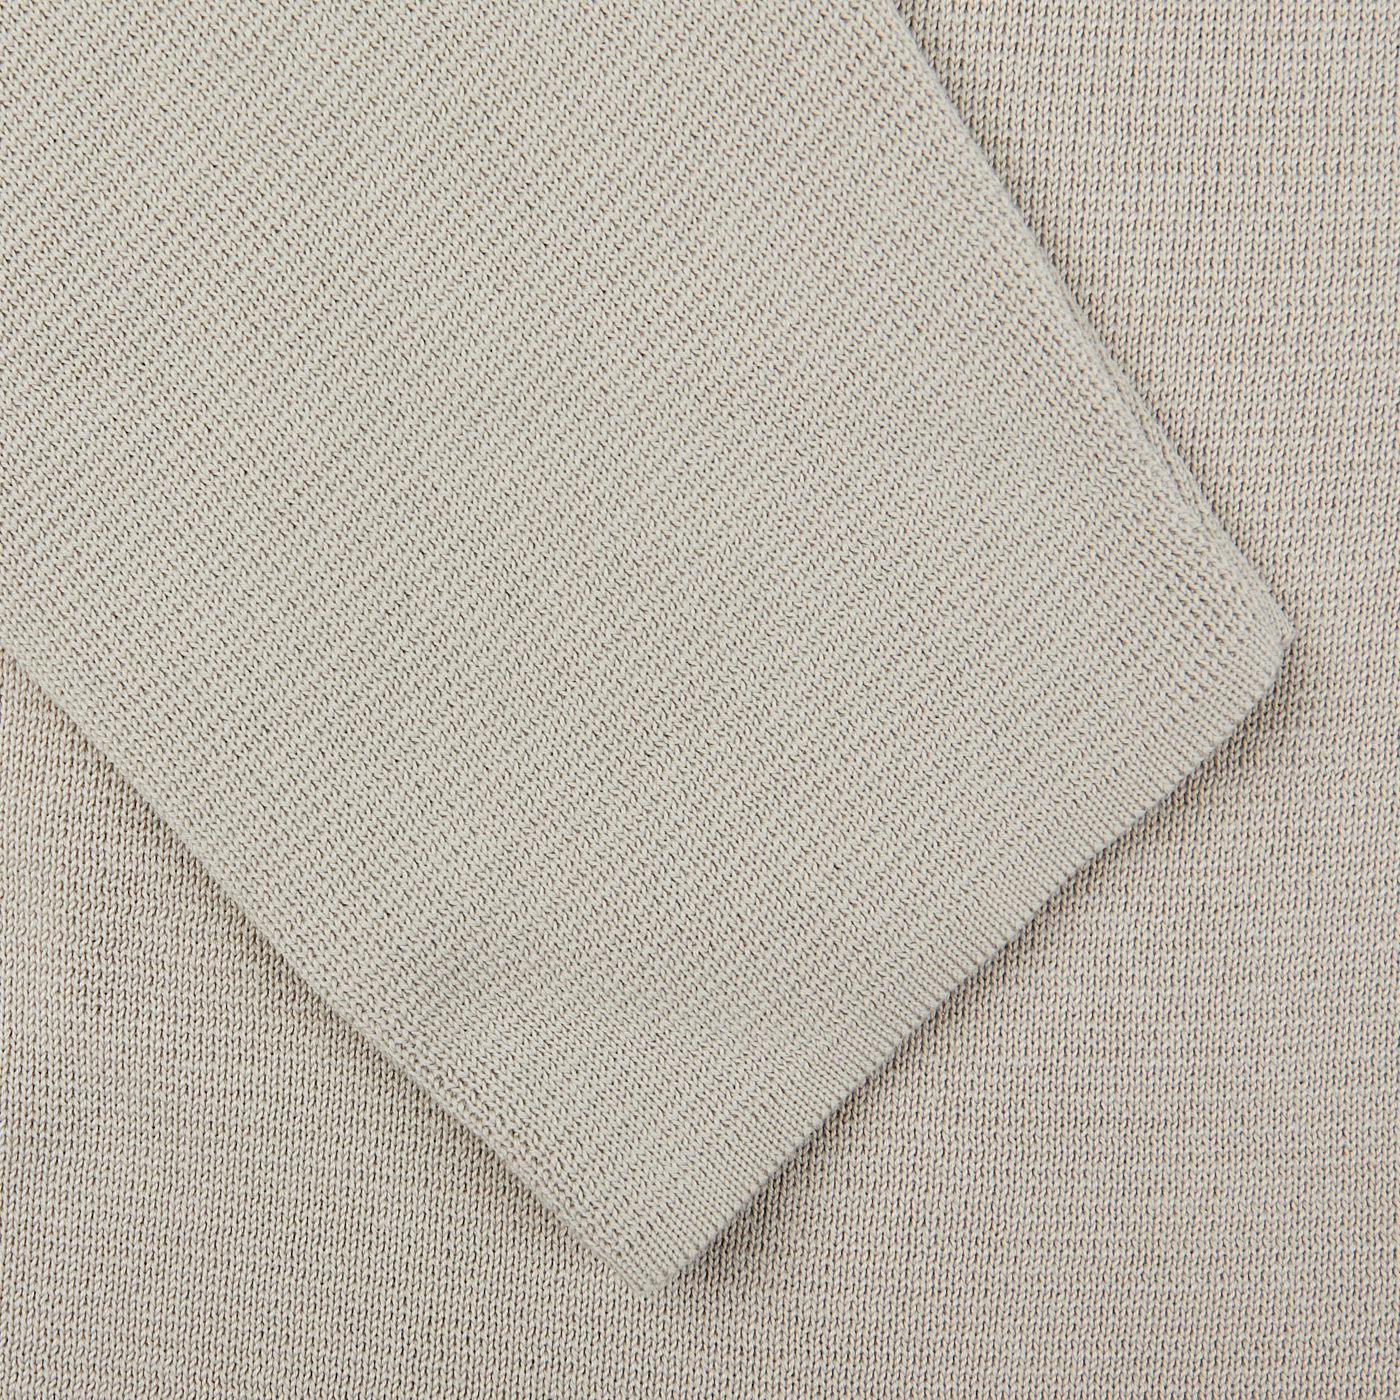 A close up image of a Nebbia Grey Crepe Cotton Field Jacket, made by Filippo de Laurentiis in Italy.